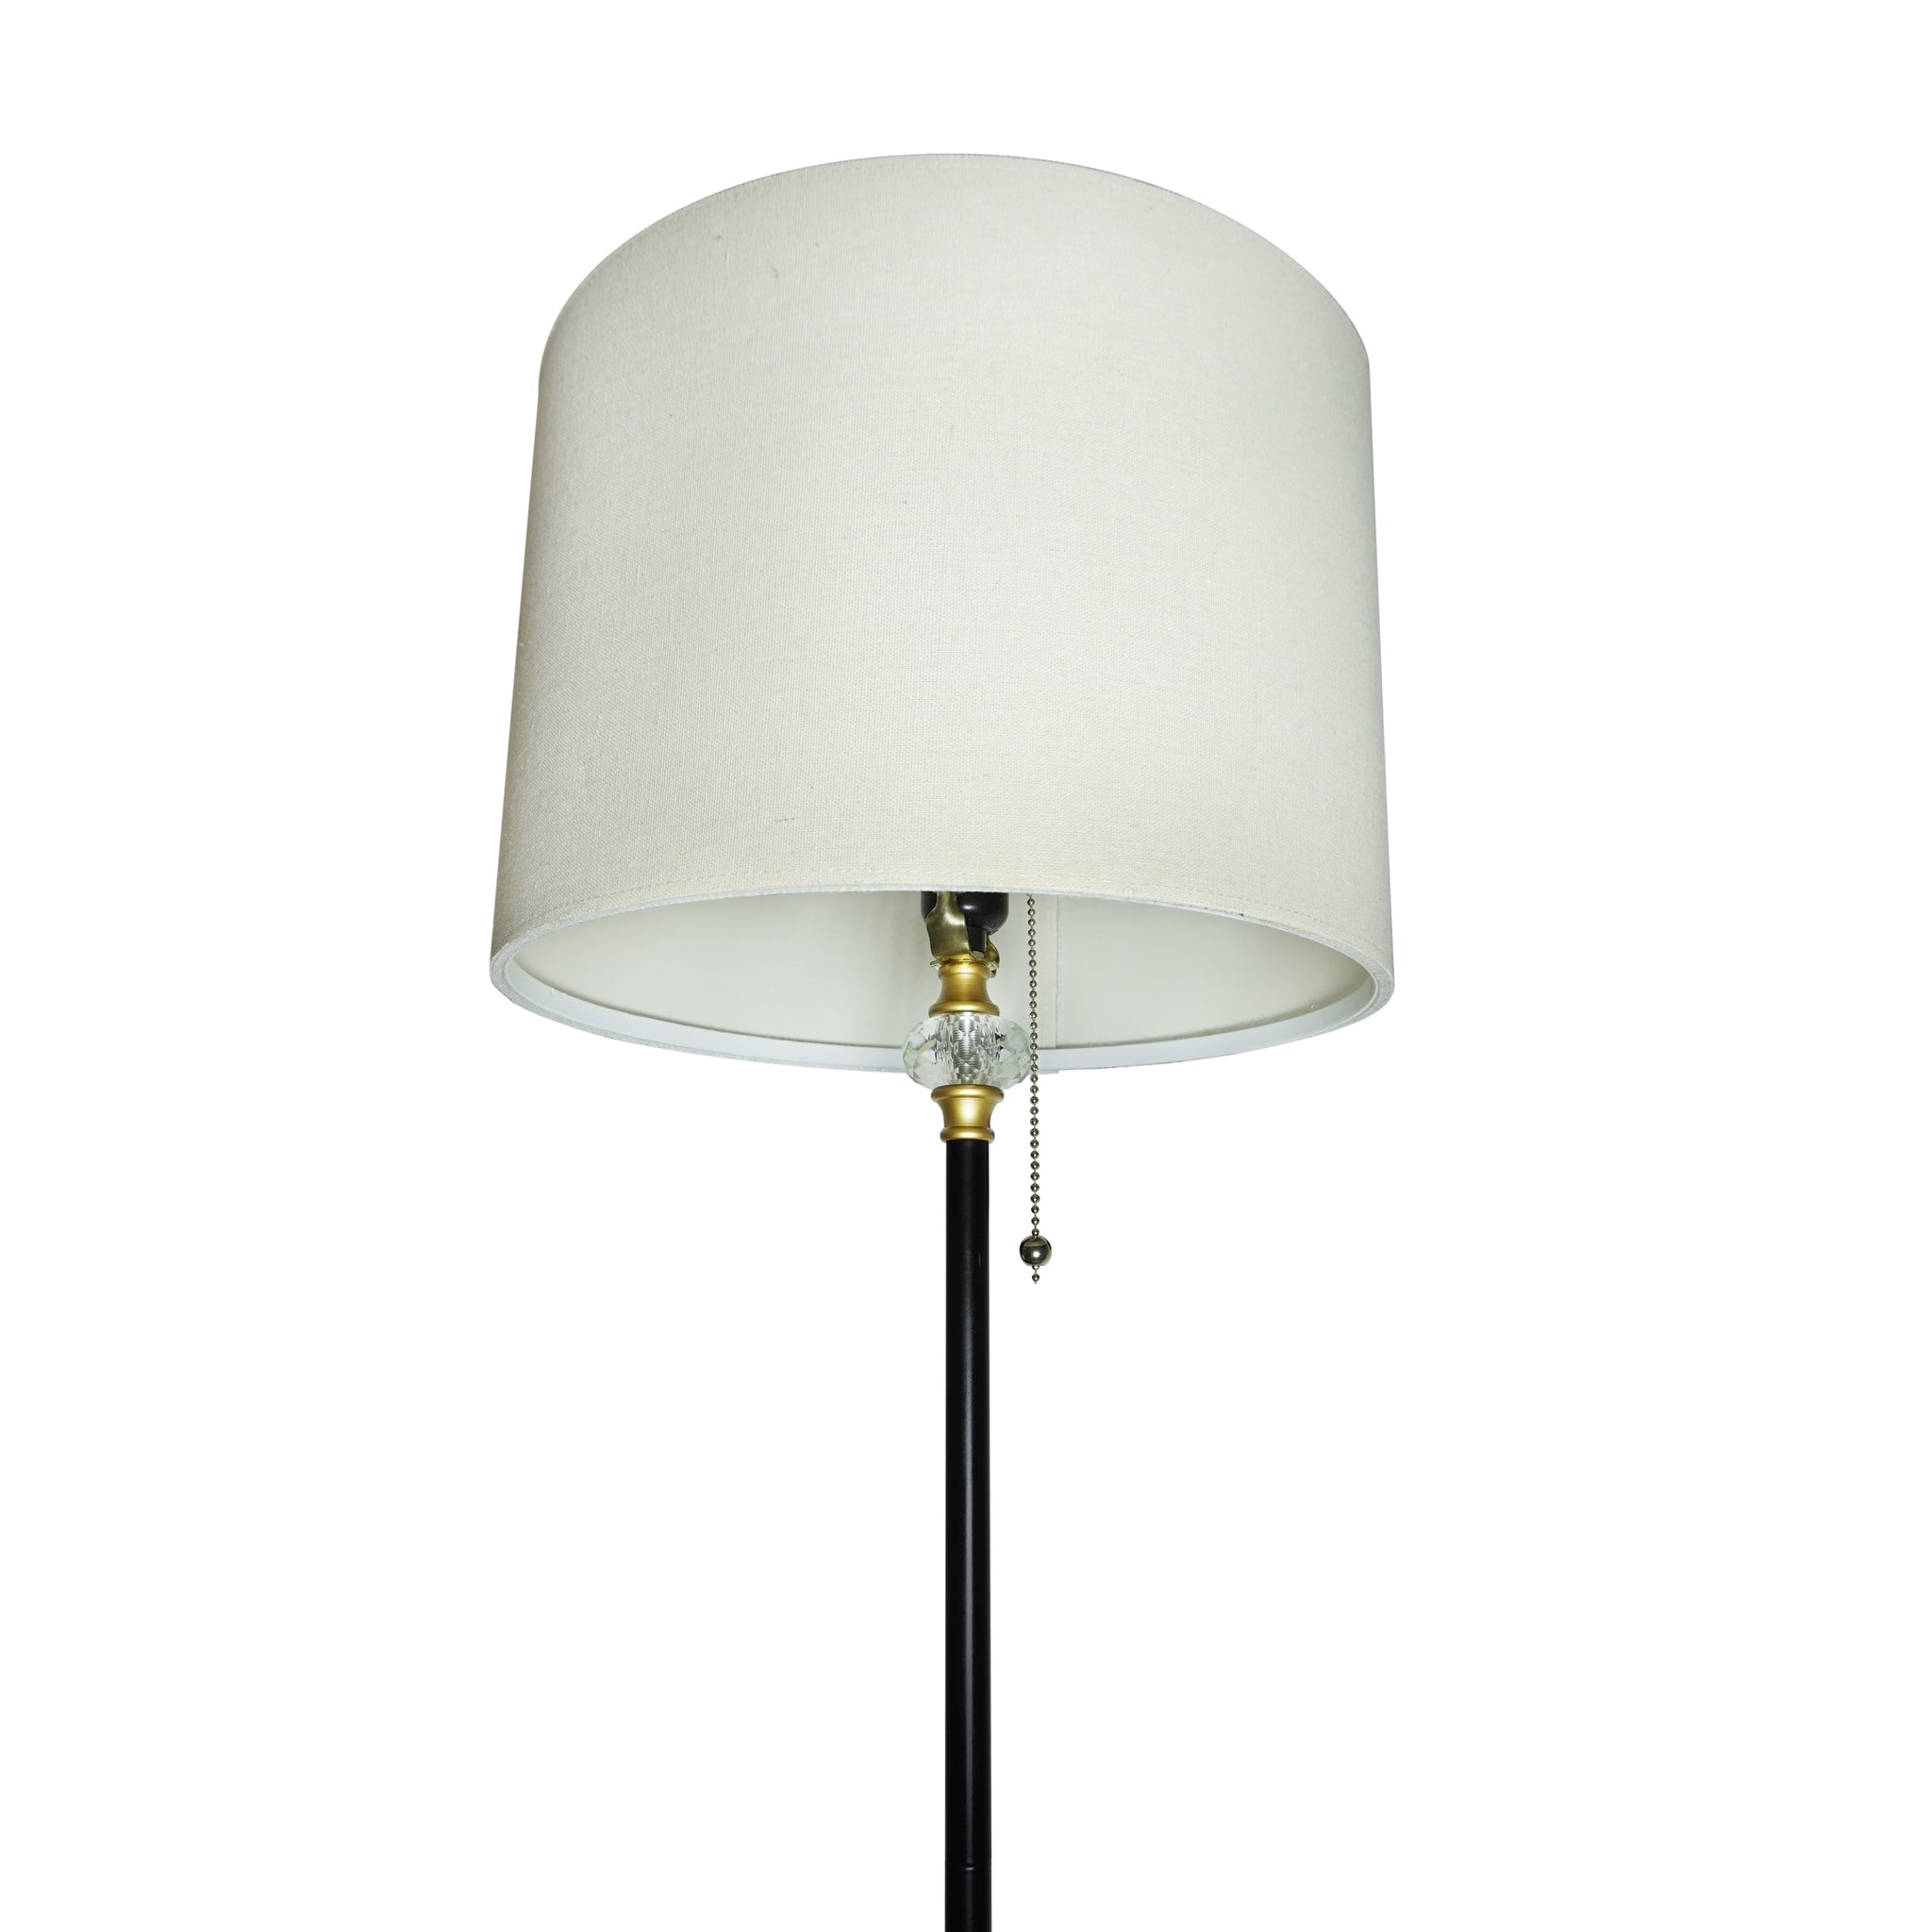 Floor Lamp For Living Room Modern Standing Lamp With Hanging Drum